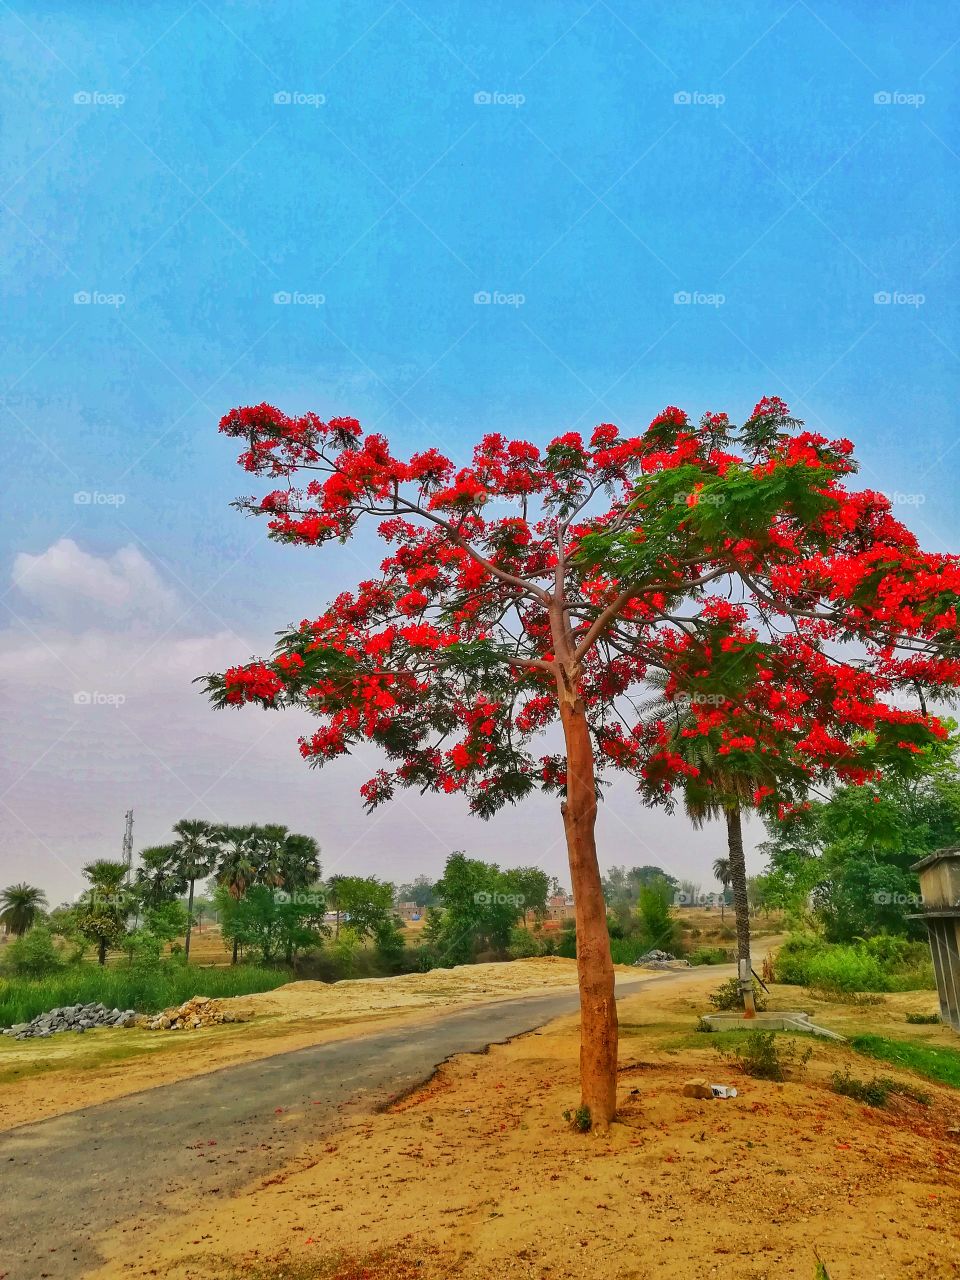 Delonix regia, the flame tree, is a species of flowering plant in the bean family Fabaceae, subfamily Caesalpinioideae. It is noted for its fern-like leaves and flamboyant display of flowers.